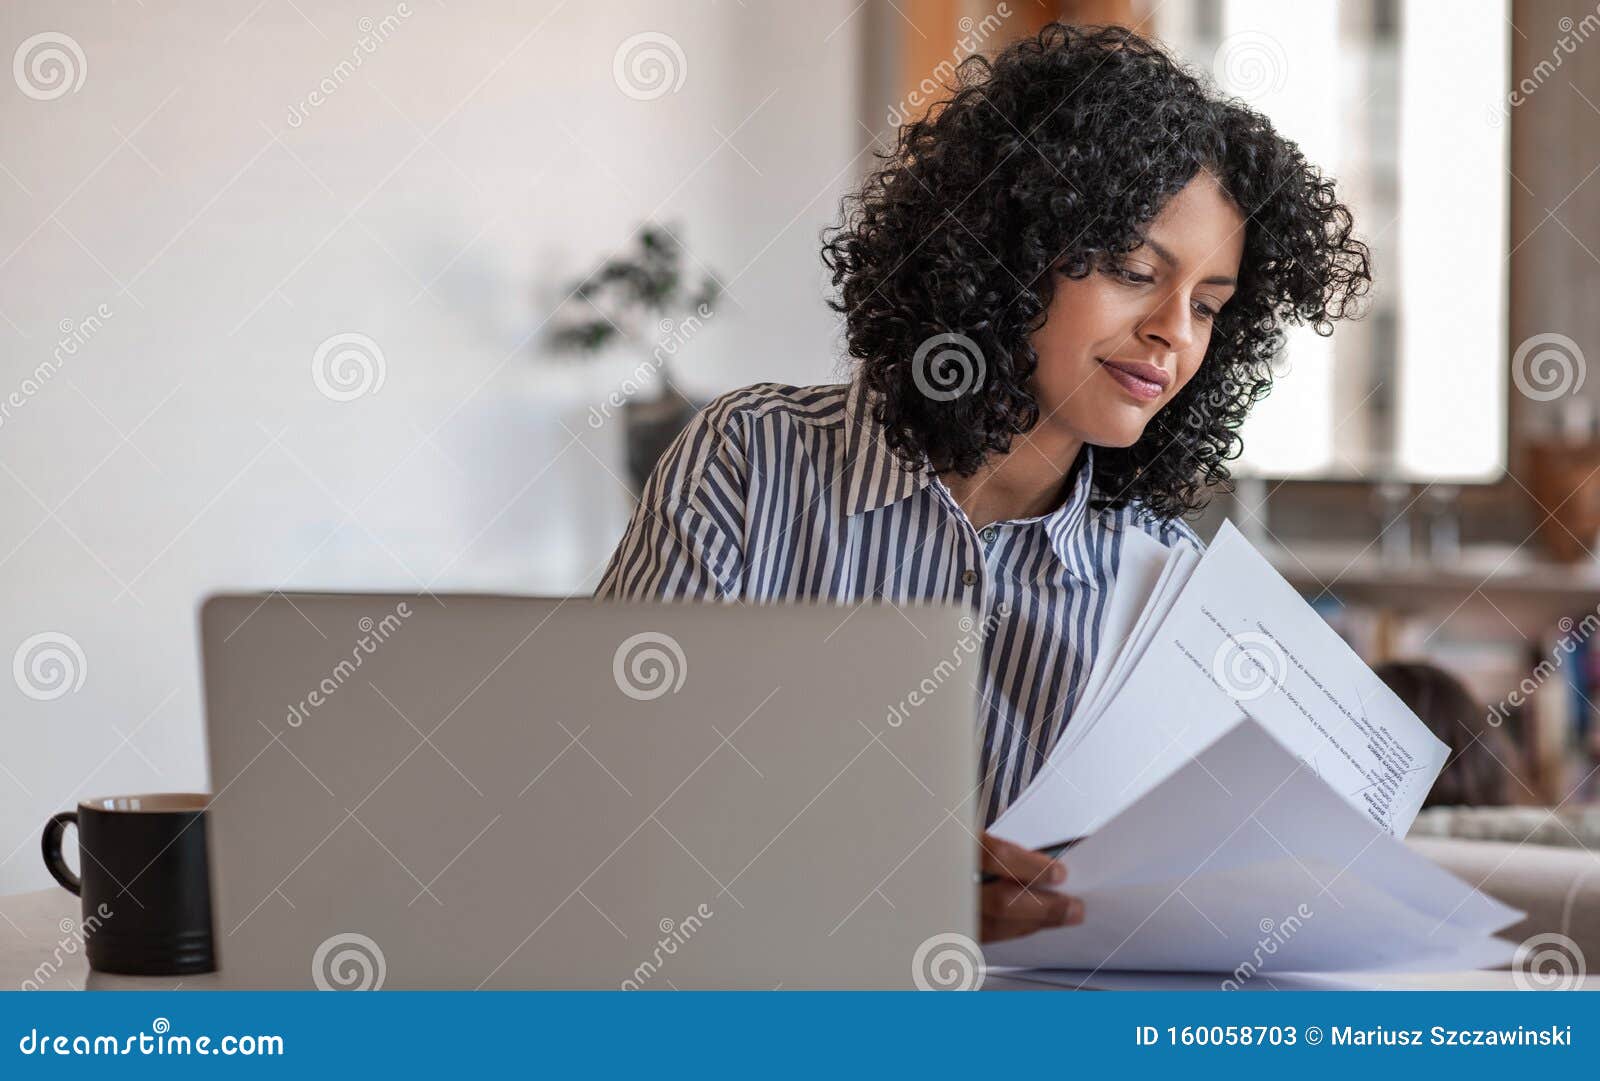 smiling young female entrepreneur going over paperwork at home